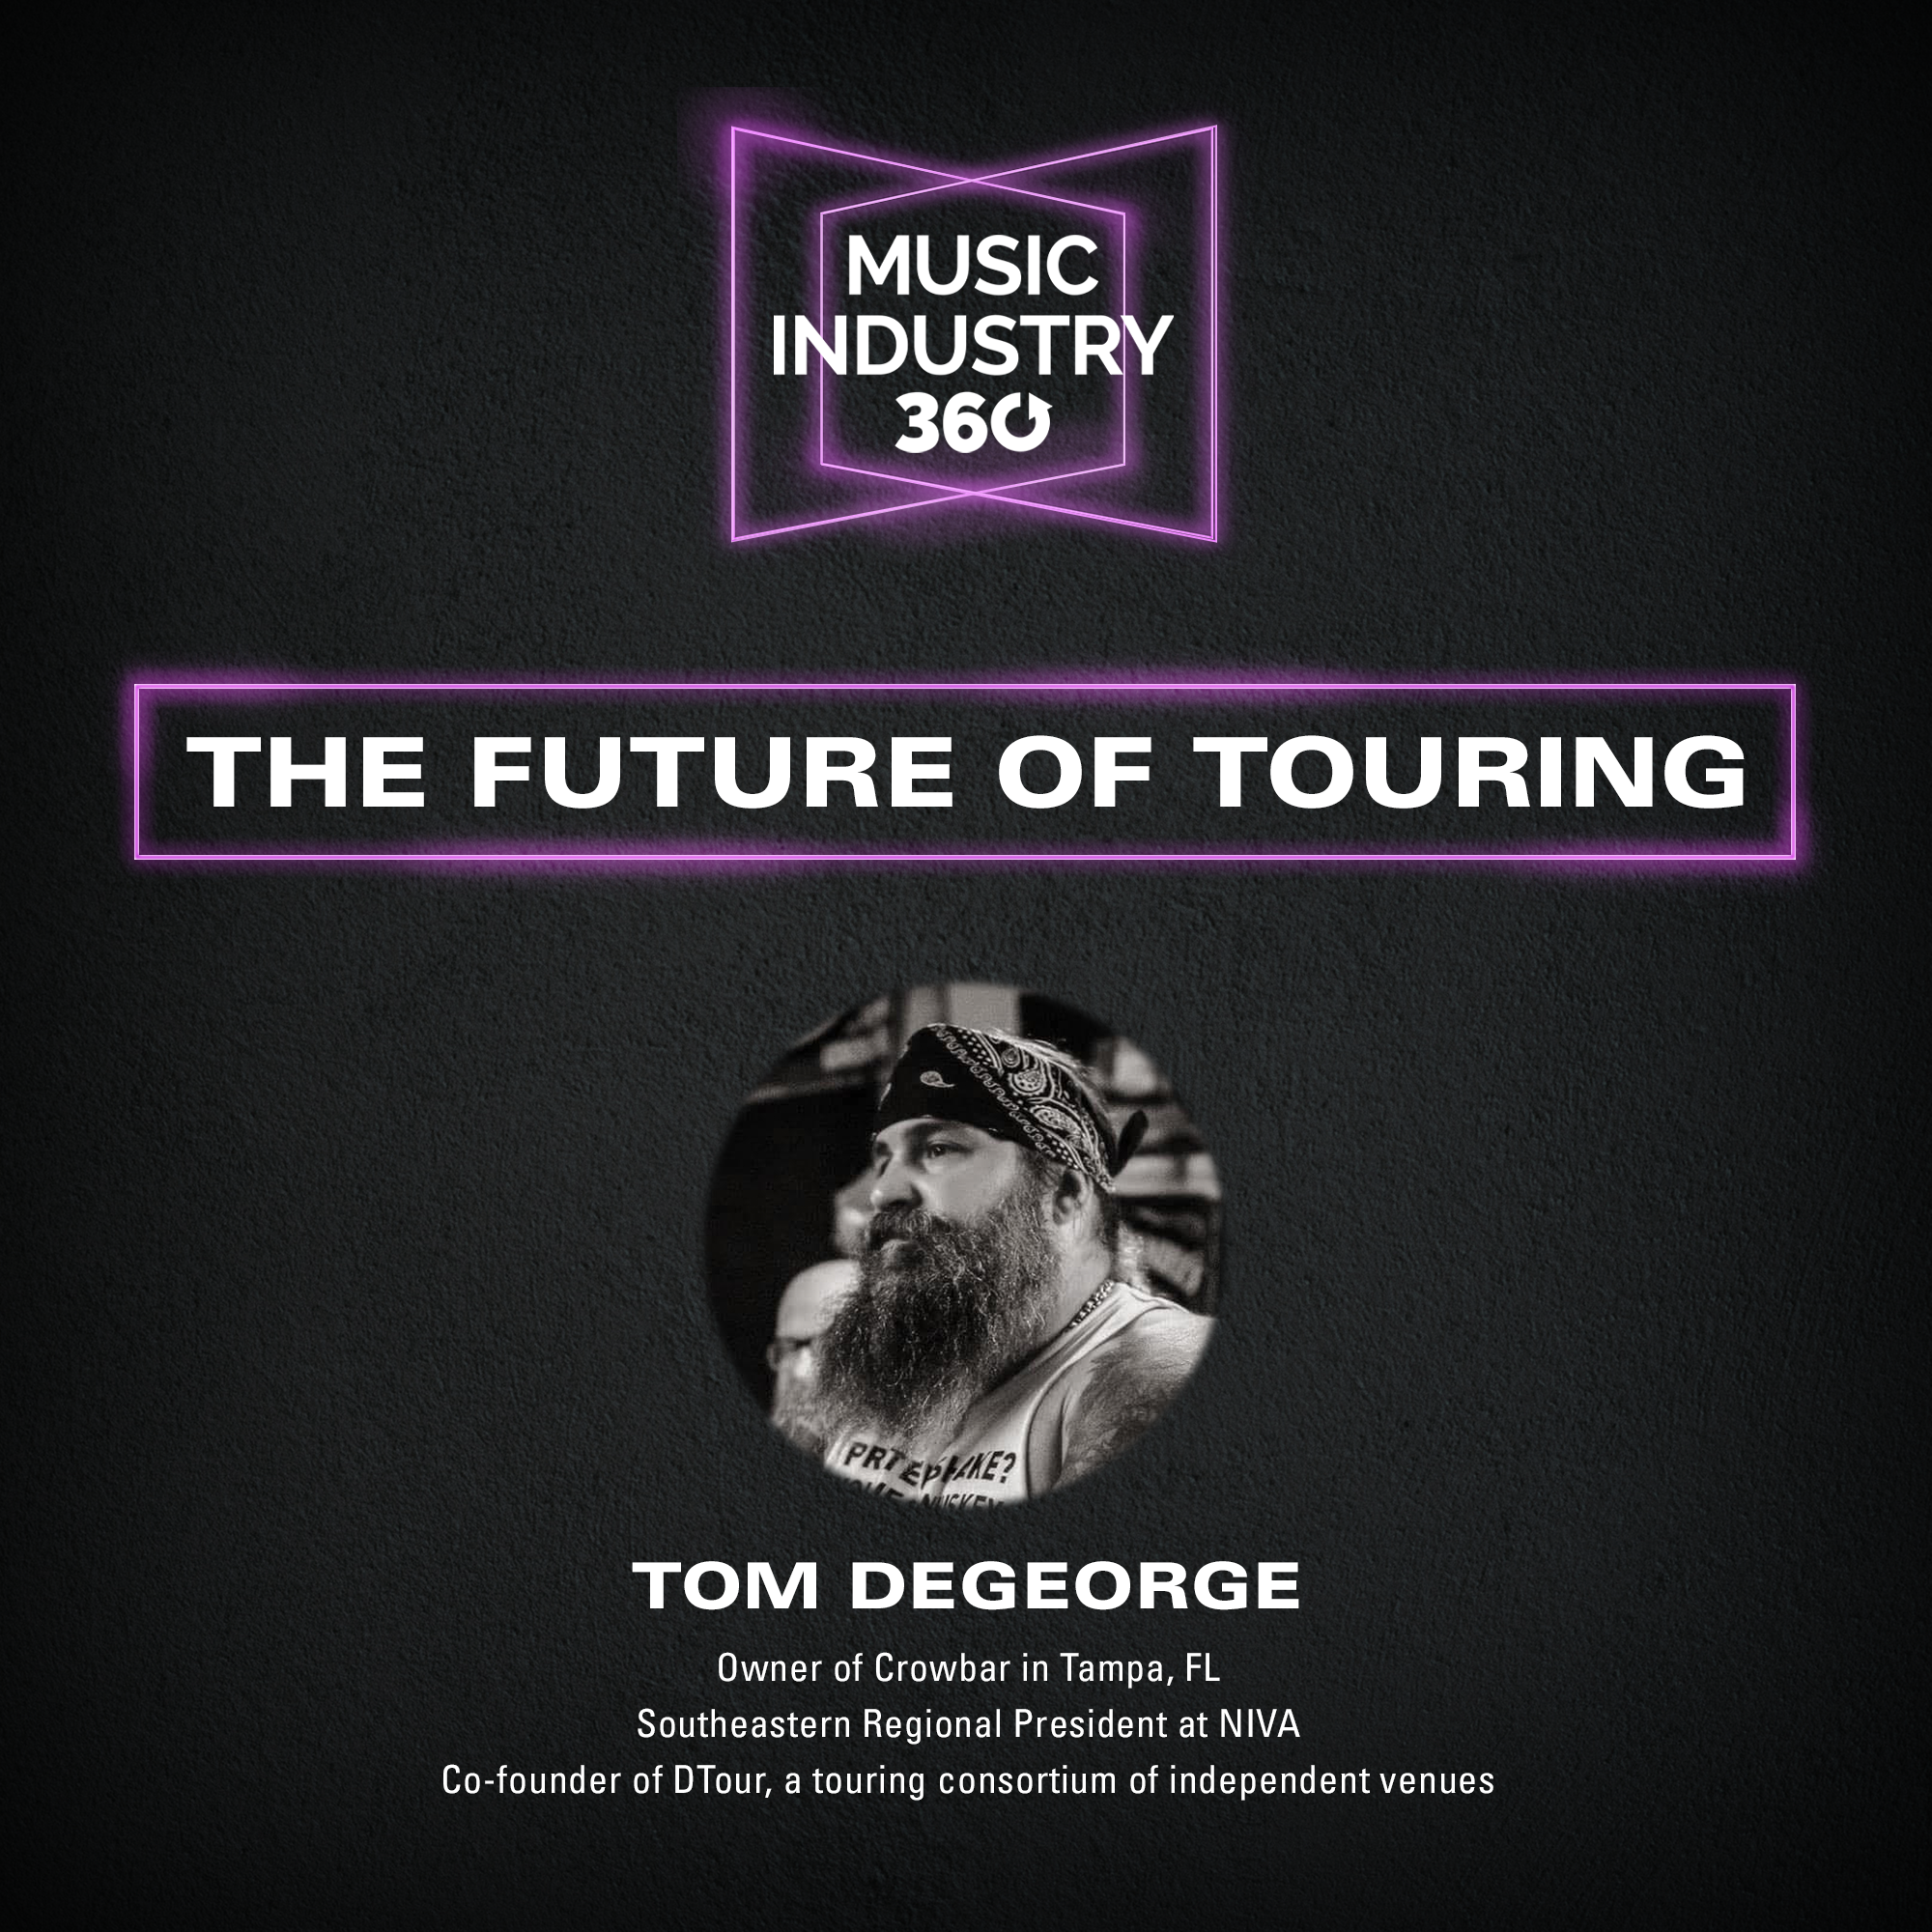 Live Music: What Is The Future of Touring? | Music Industry 360 Podcast